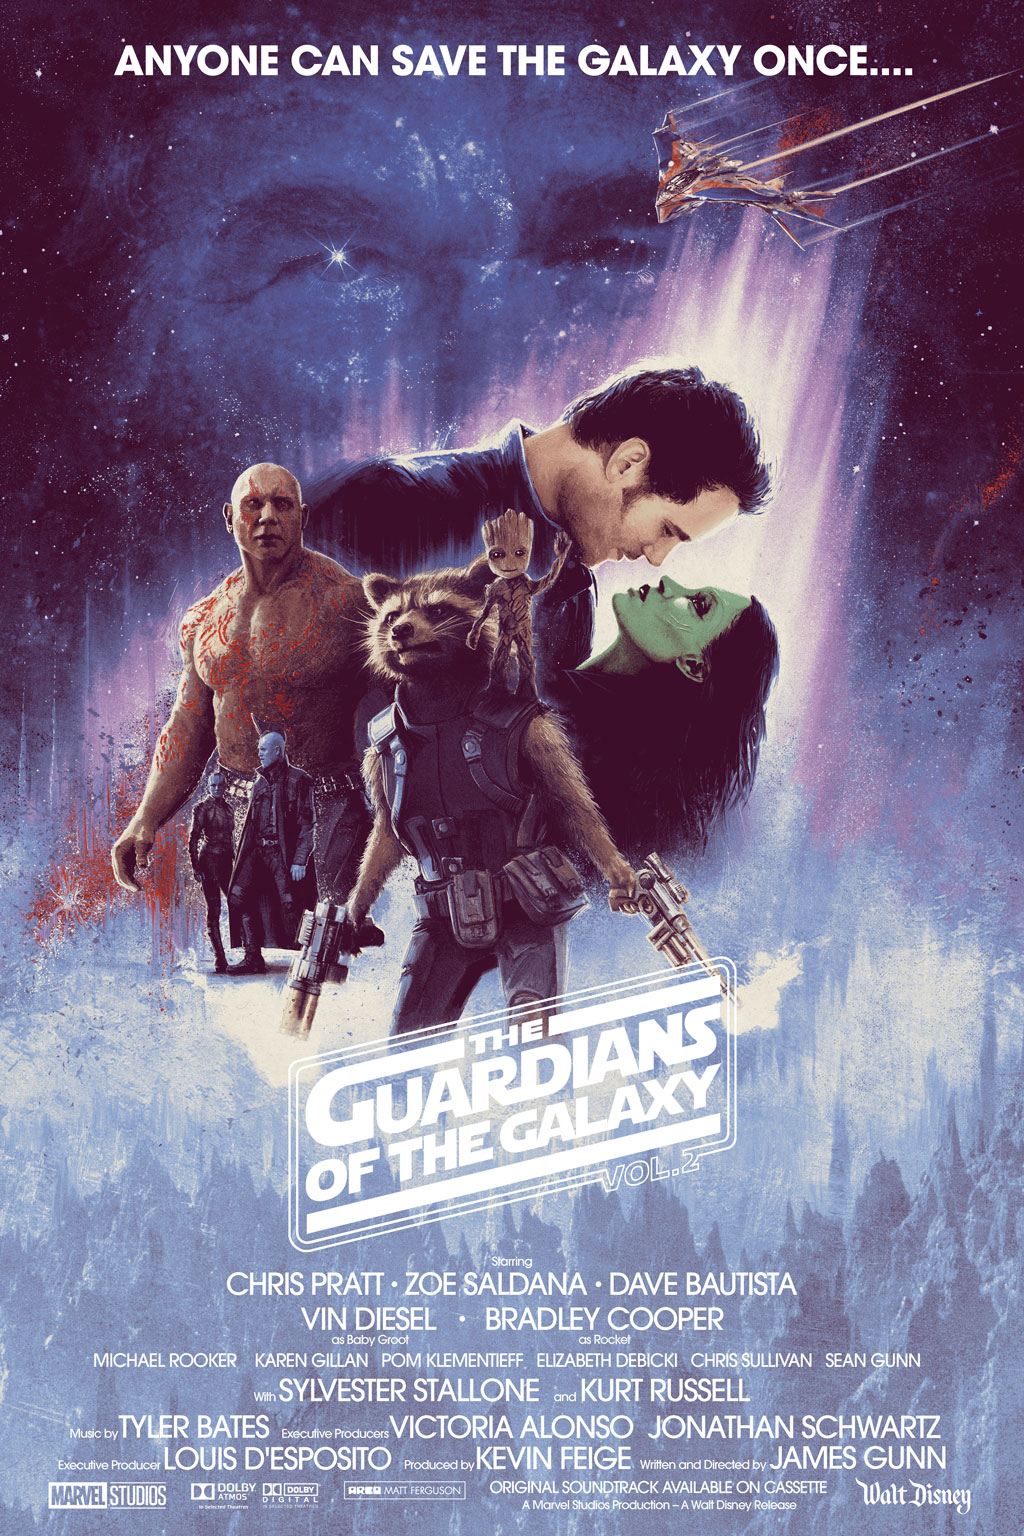 Baby Groot Poster, Minimal Avengers Illustrated Movie Print